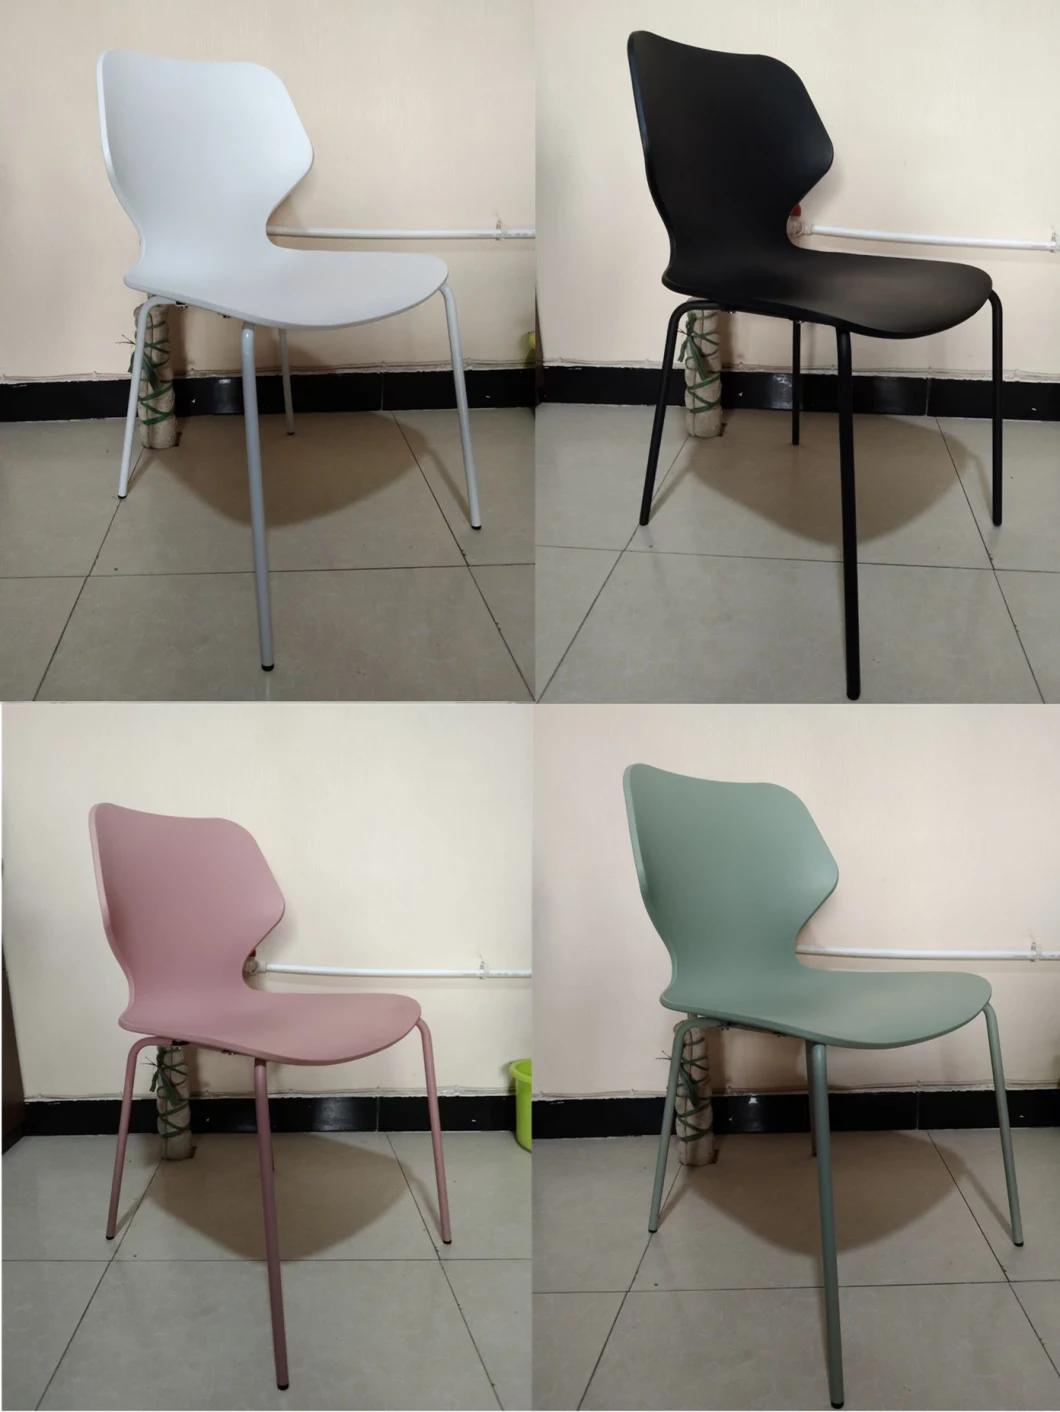 Nordic Design Plastic Chairs for Dining Table Dining Chairs Metal Leg